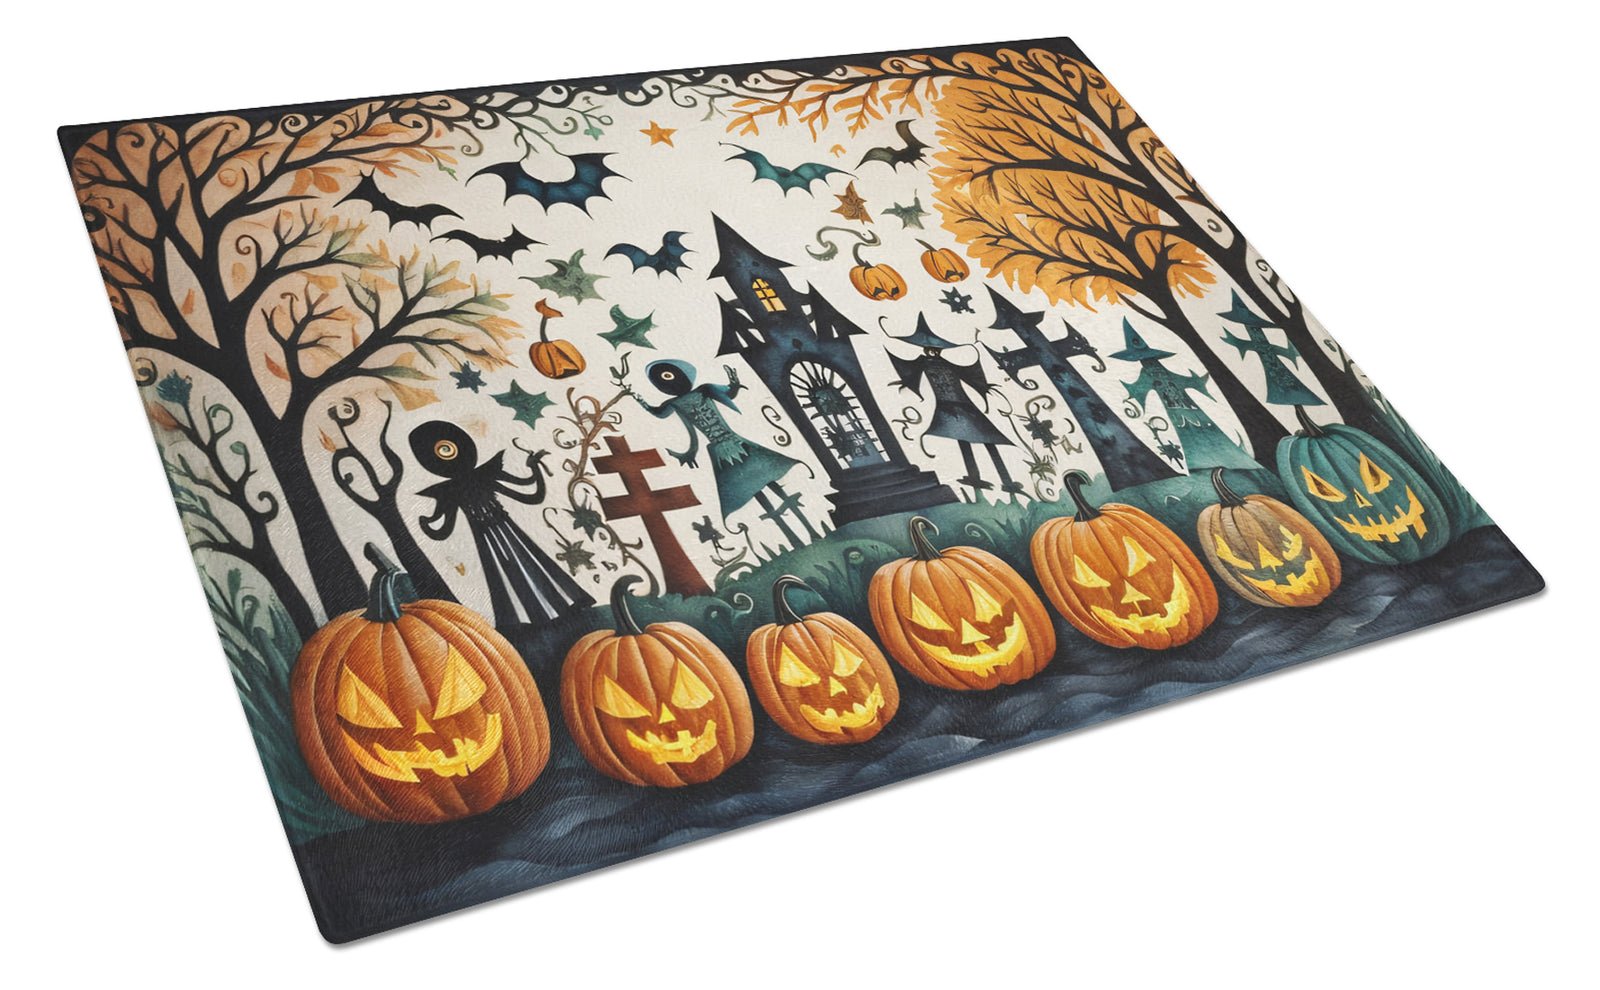 Buy this Papel Picado Skeletons Spooky Halloween Glass Cutting Board Large